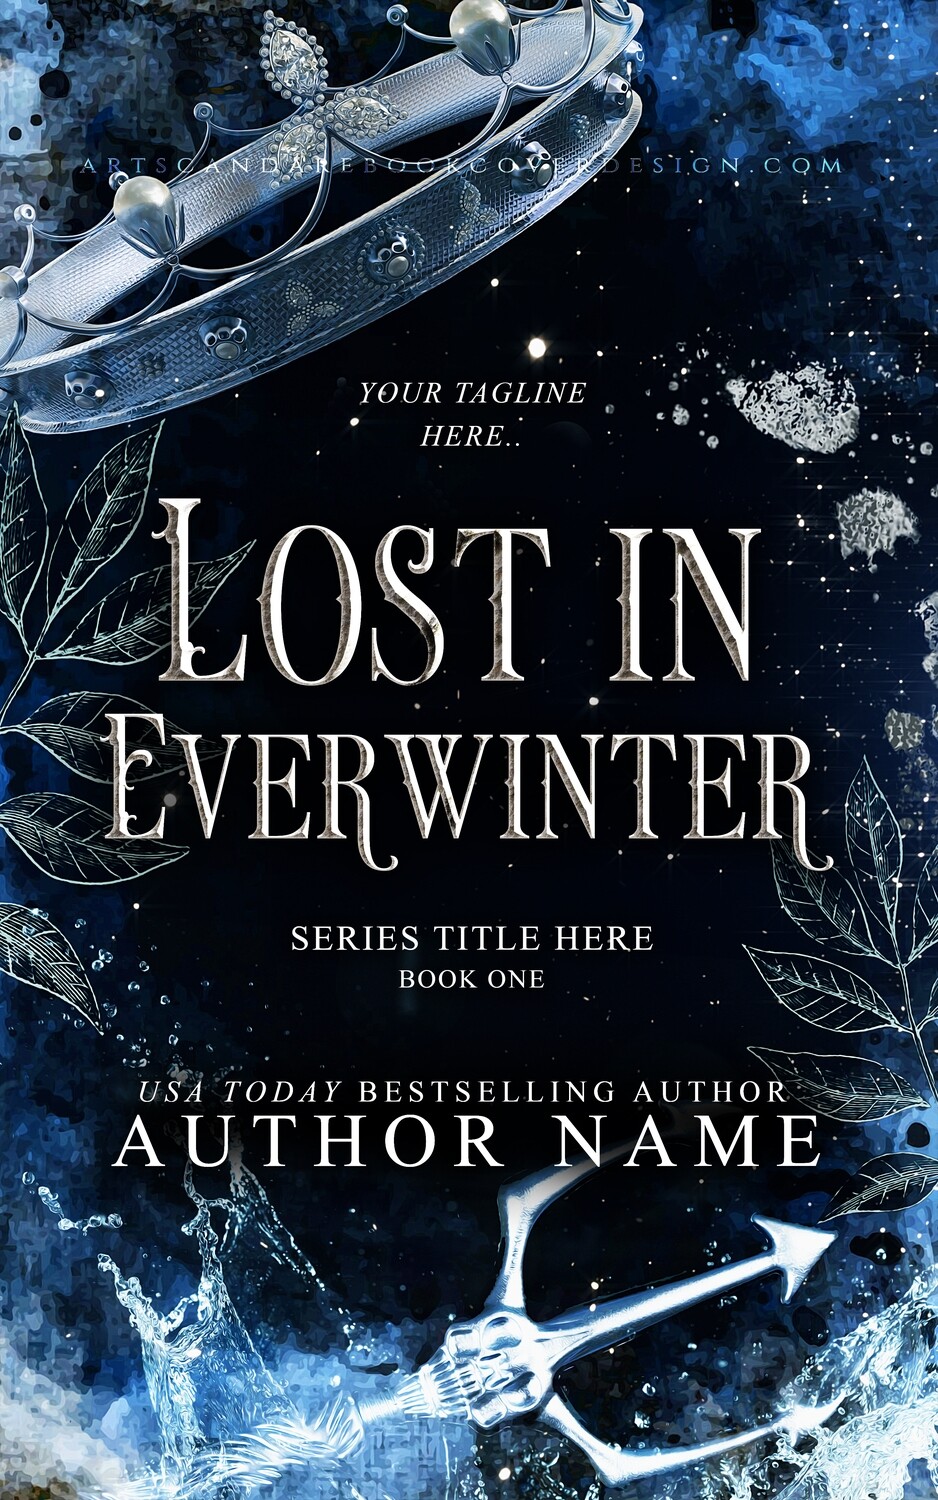 LOST IN EVERWINTER